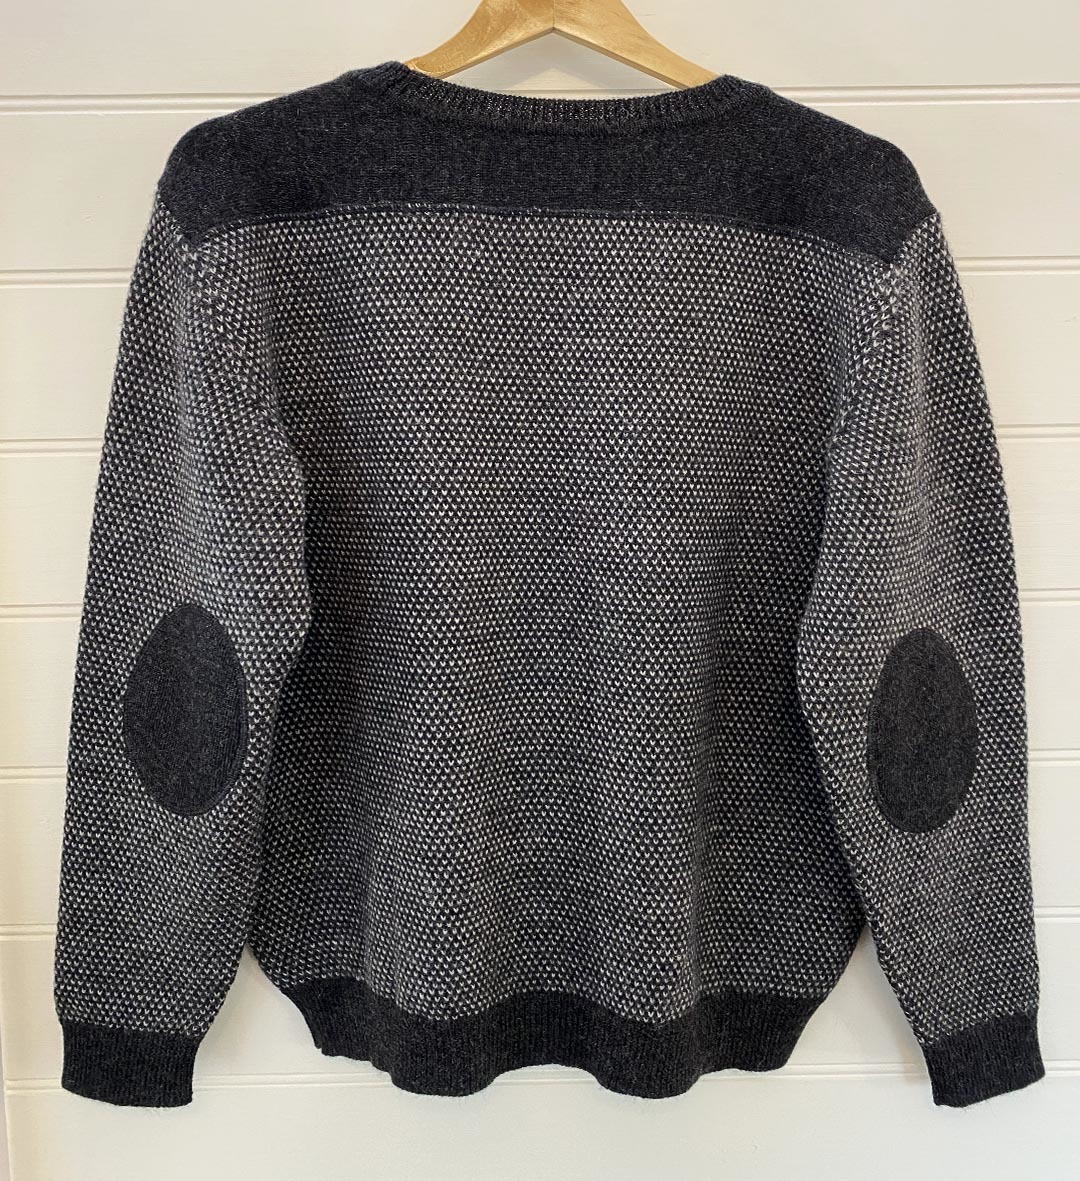 Pique Sweater - Charcoal/Sliver - 2